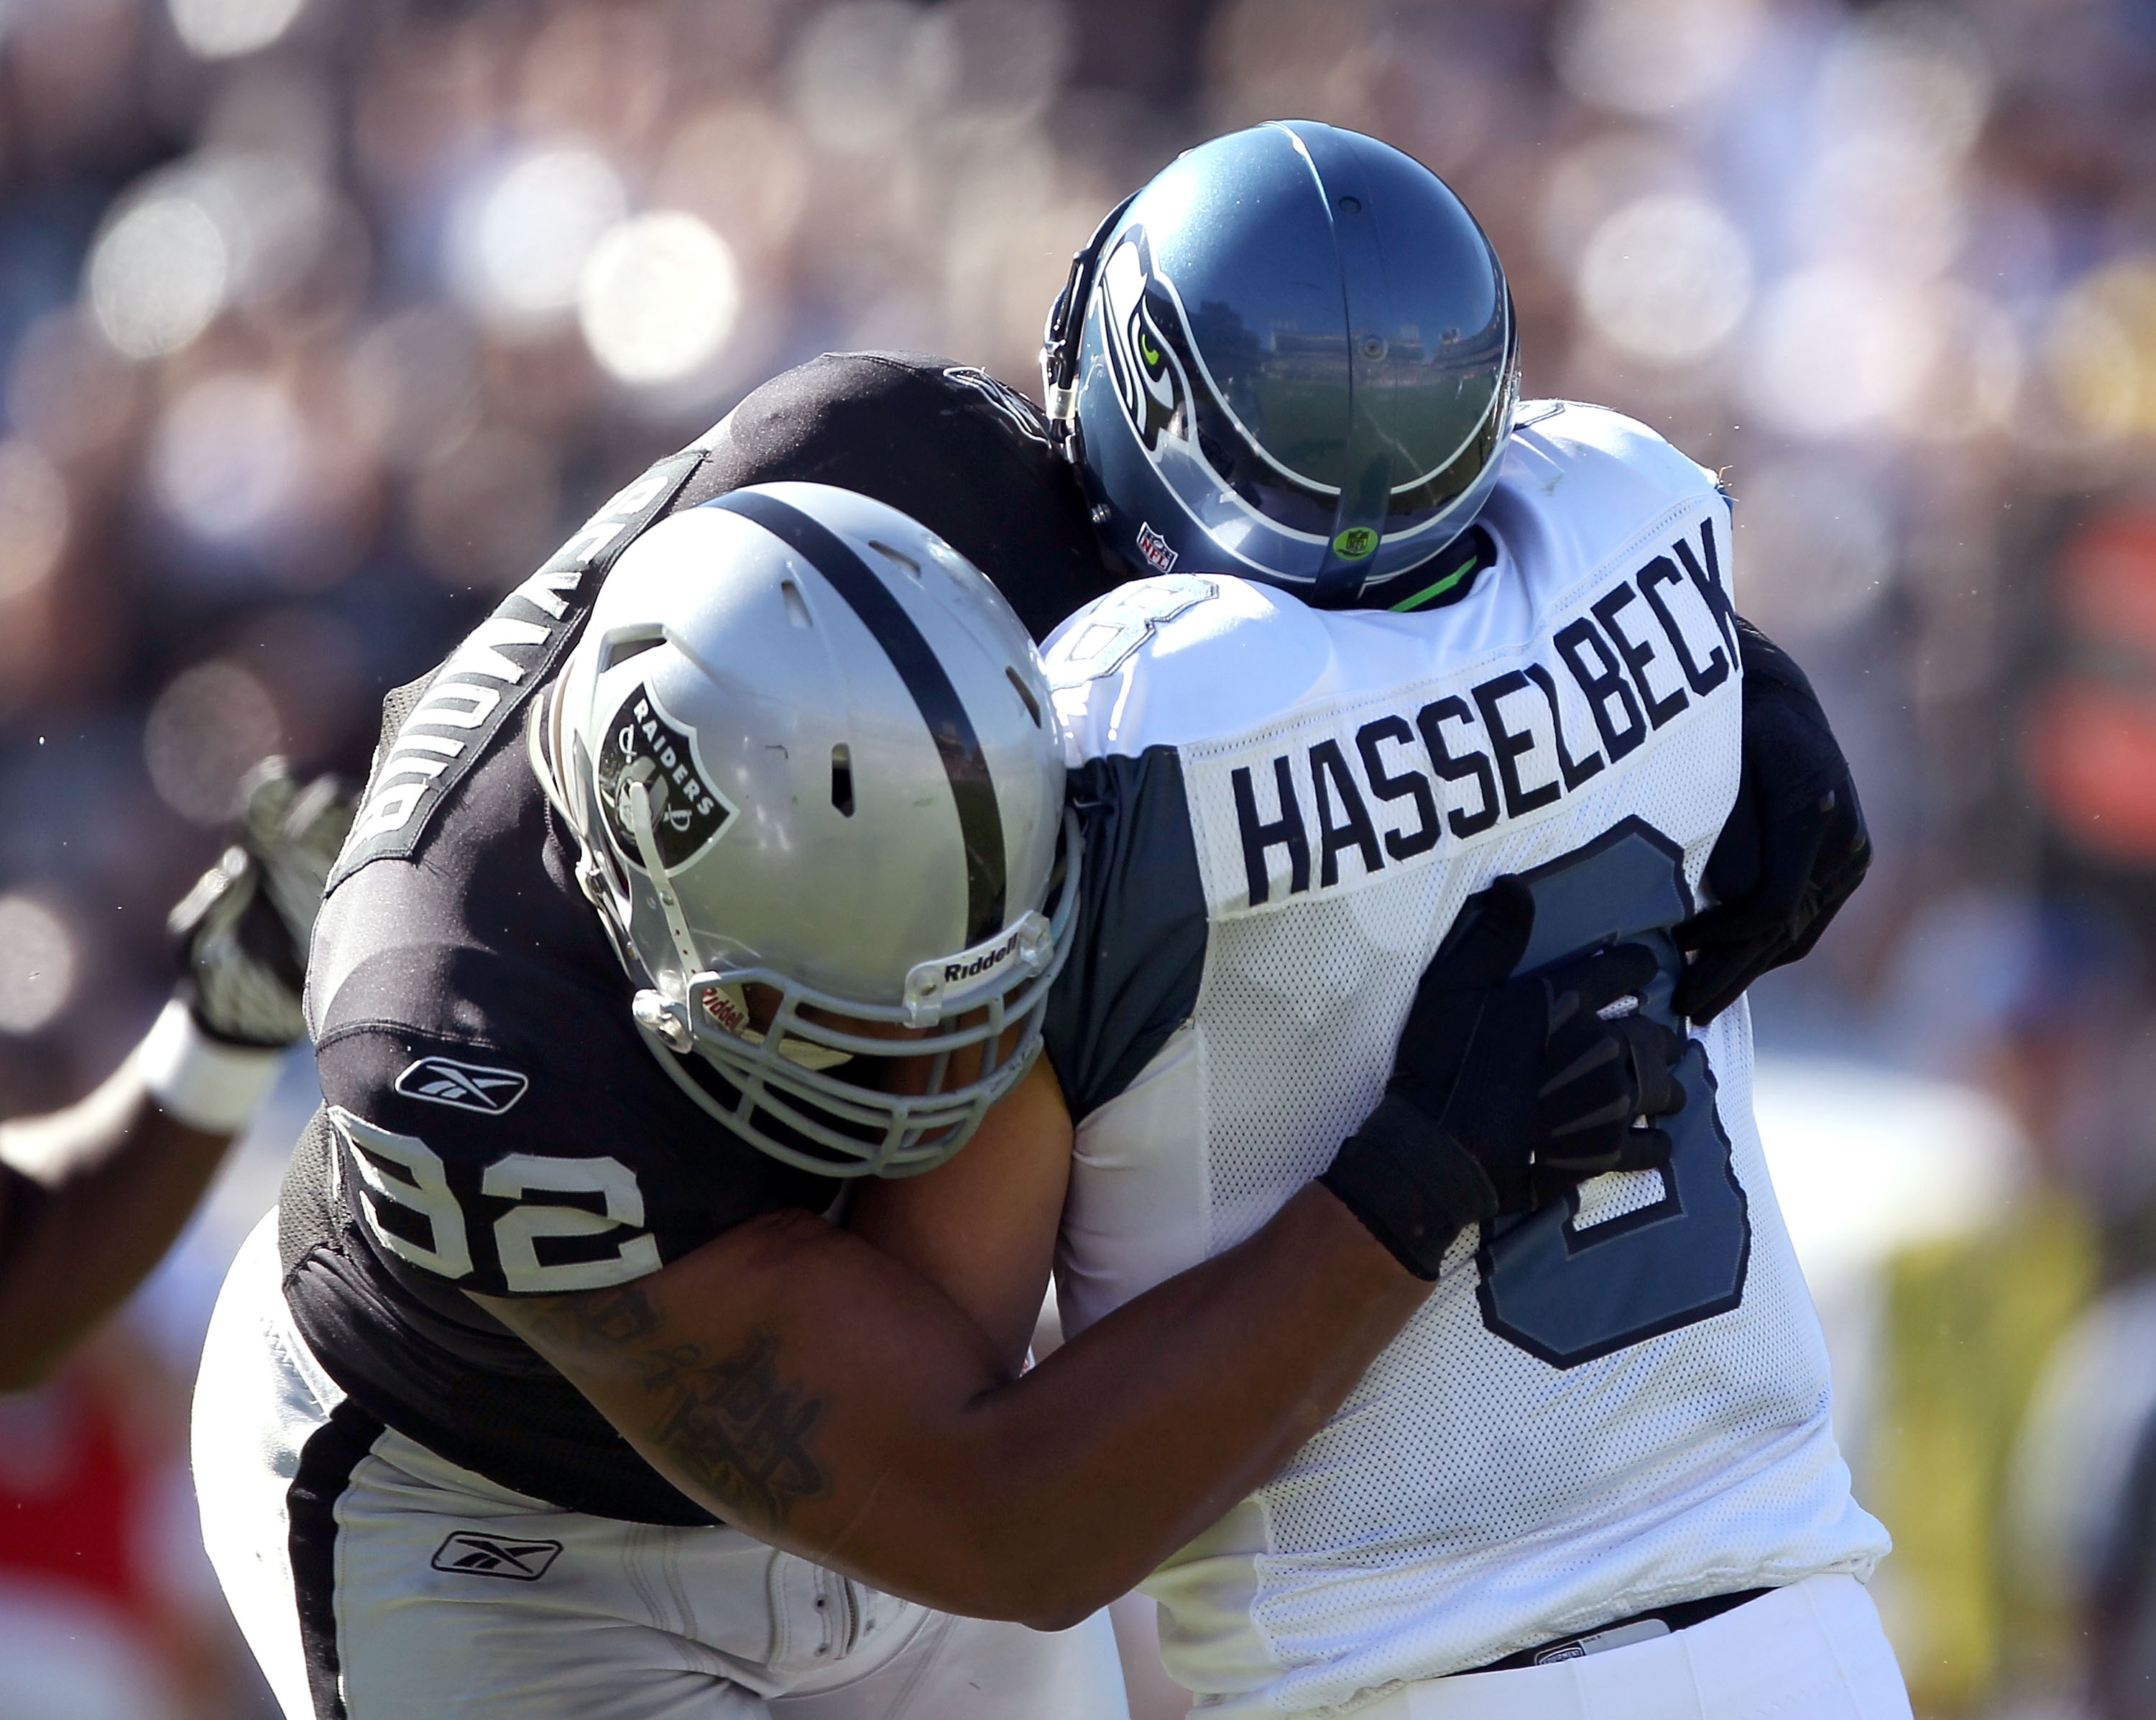 OAKLAND, CA - OCTOBER 31:  Matt Hasselbeck #8 of the Seattle Seahawks is tackled by Richard Seymour #92 of the Oakland Raiders at Oakland-Alameda County Coliseum on October 31, 2010 in Oakland, California.  (Photo by Ezra Shaw/Getty Images)